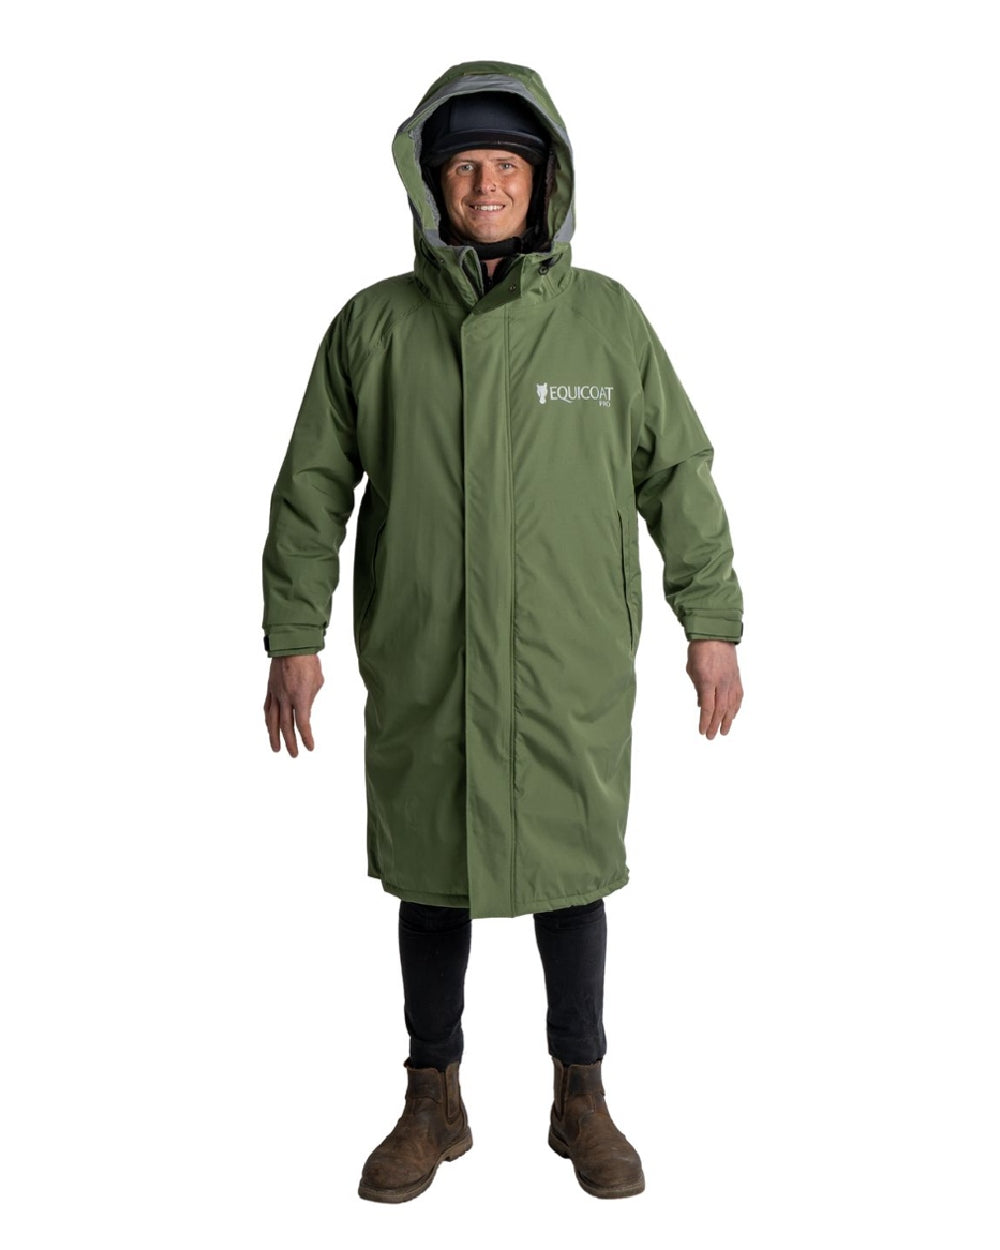 Equicoat Adults Pro Coat in Forest Green 